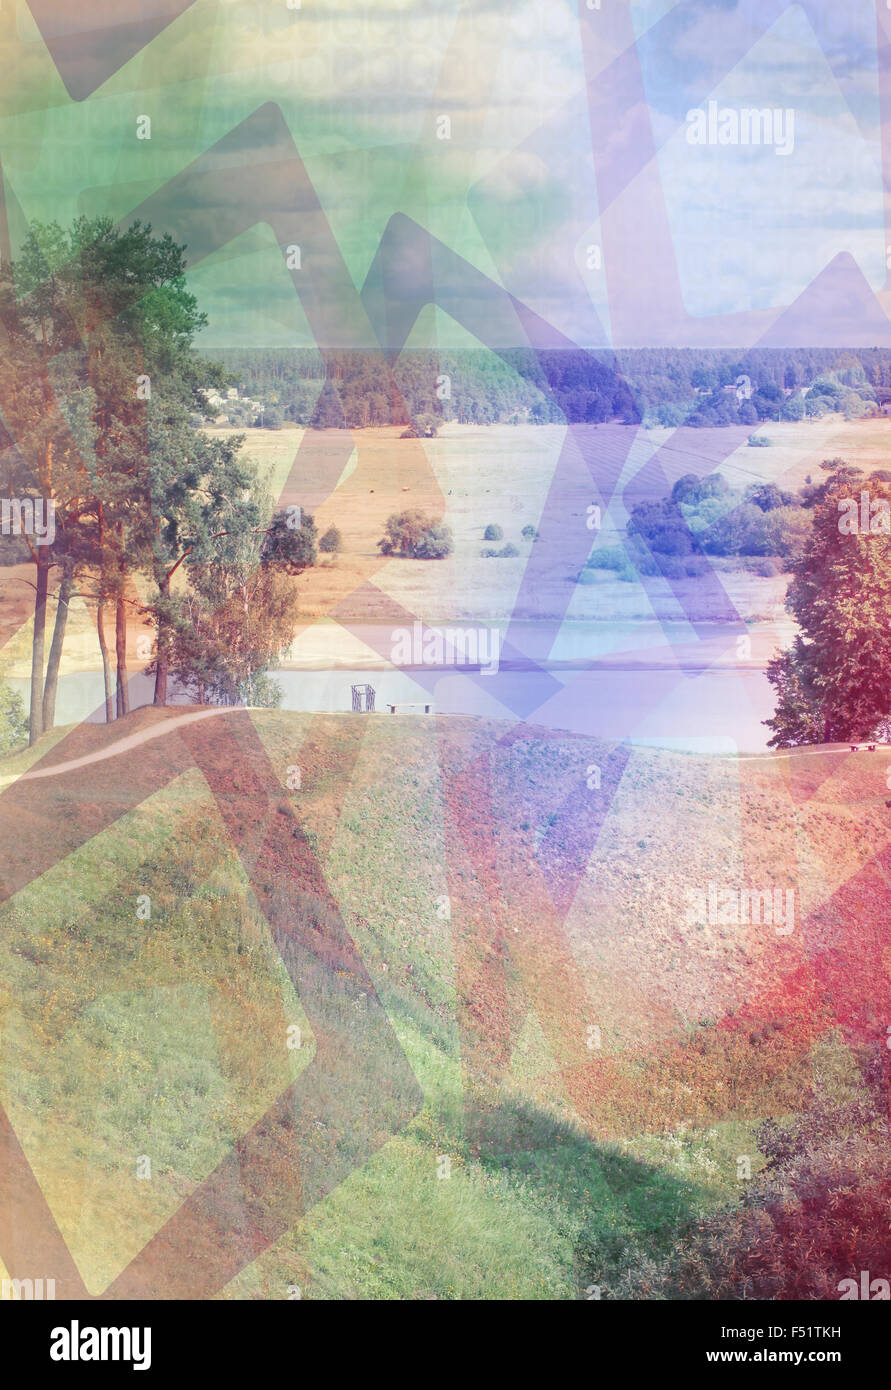 Double exposure effect of autumnal trees, river and geometric shapes Stock Photo